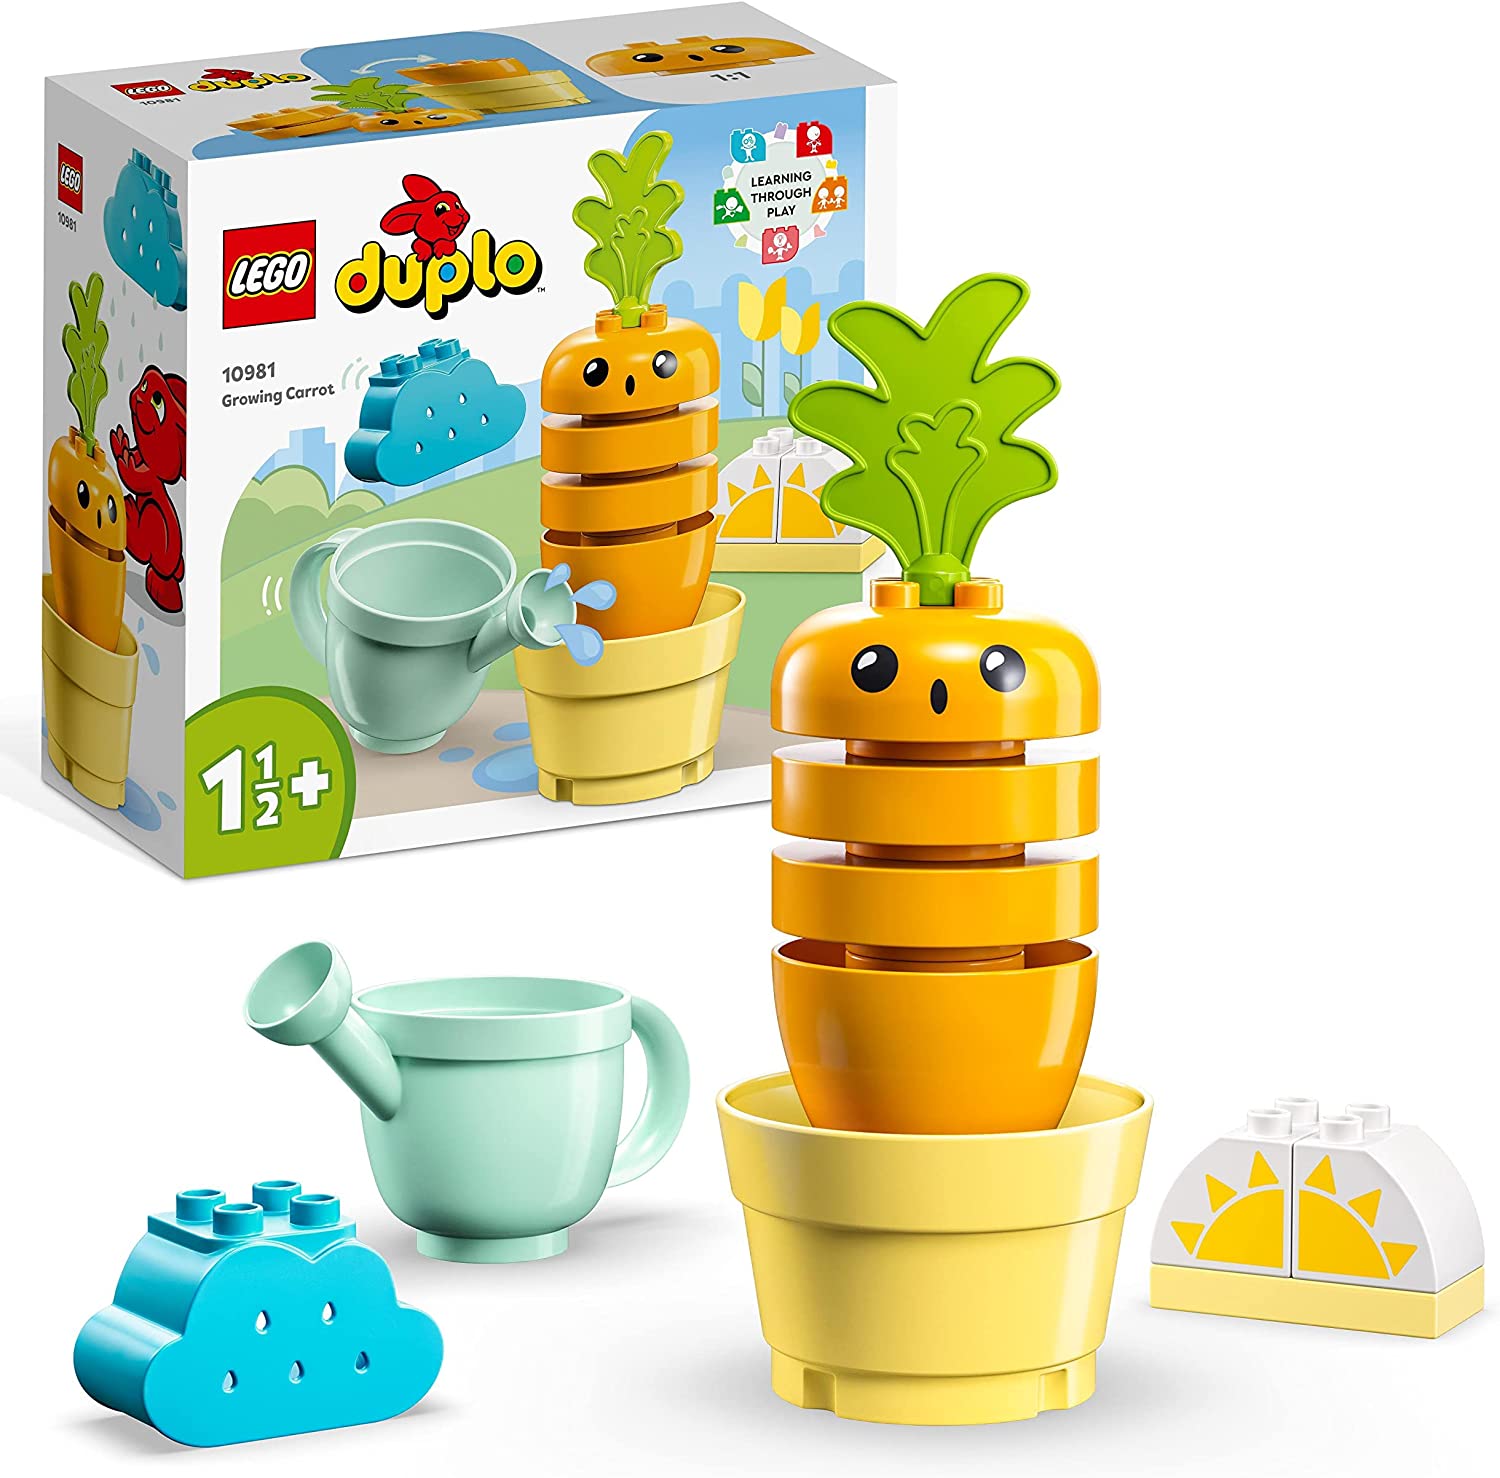 LEGO 10981 Duplo My First Growing Carrot, Easter Gift for Toddlers, Easter Decoration, Stacking Toy for Babies from 1.5 Years with 4 vegetable Stones, Learning Toy in Easter Basket